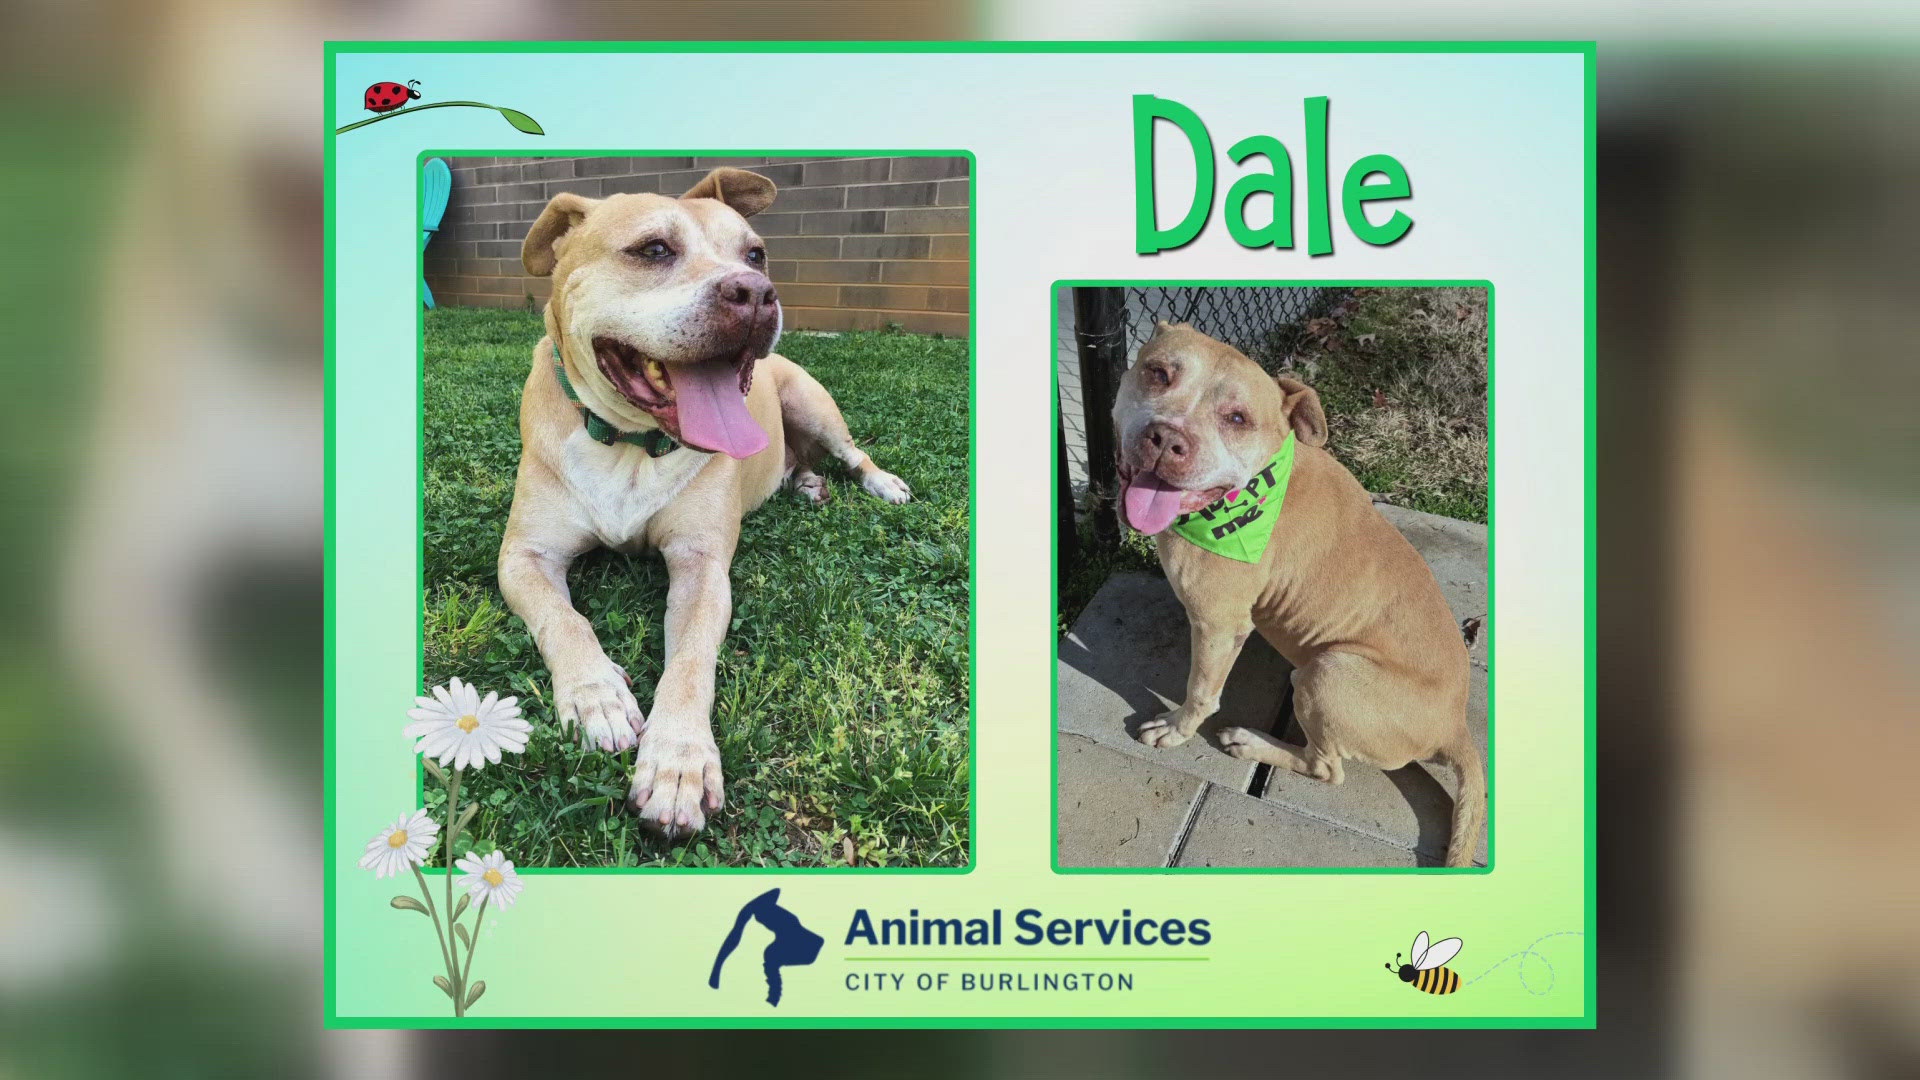 Let's get Dale adopted!